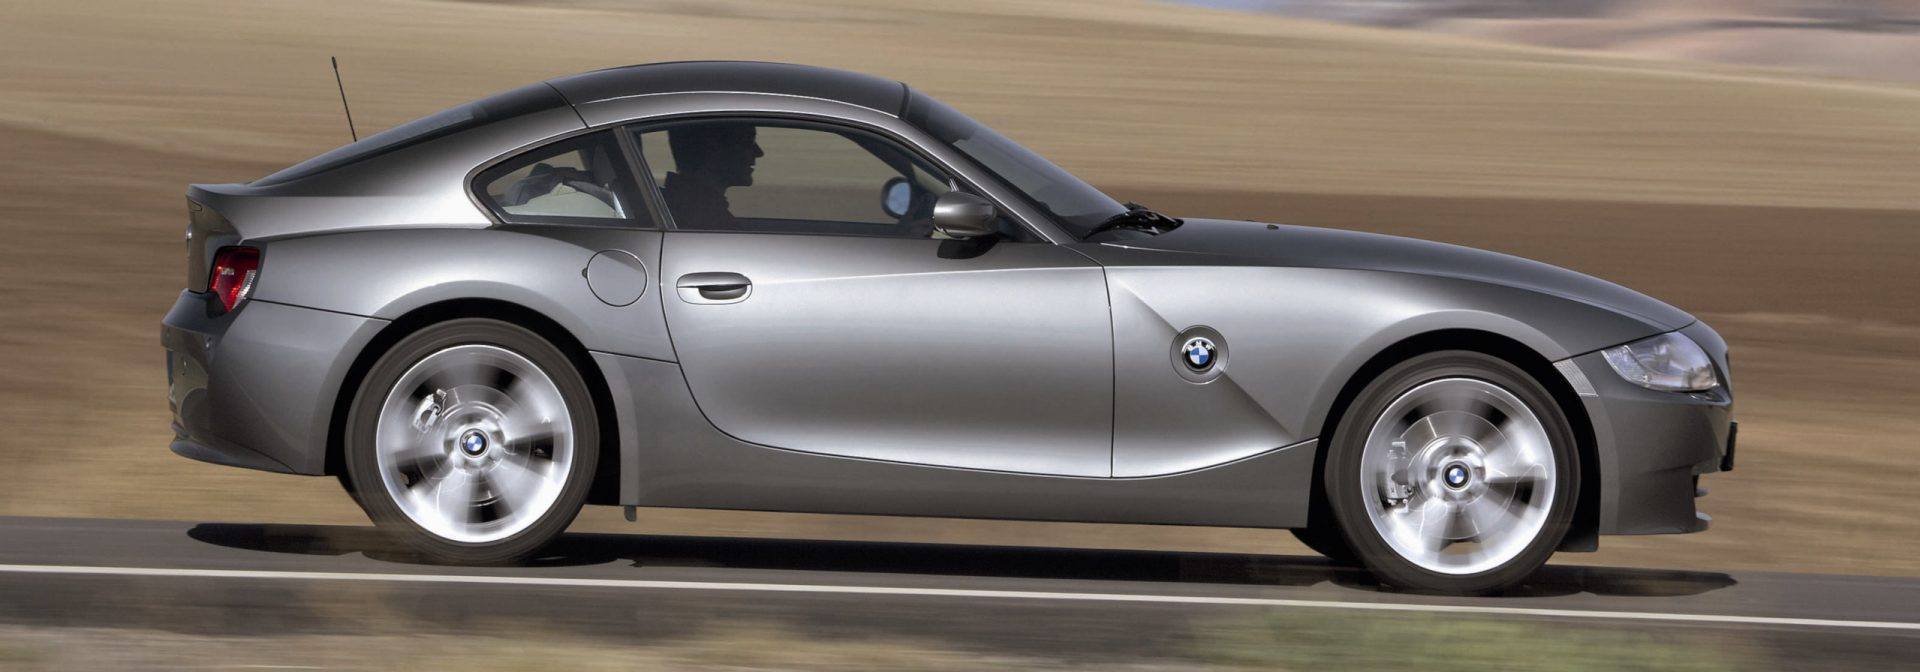 BMW Z4 Coupe and M Coupe assembly begins. Beauty shot of Z4 on the road with desert background. 